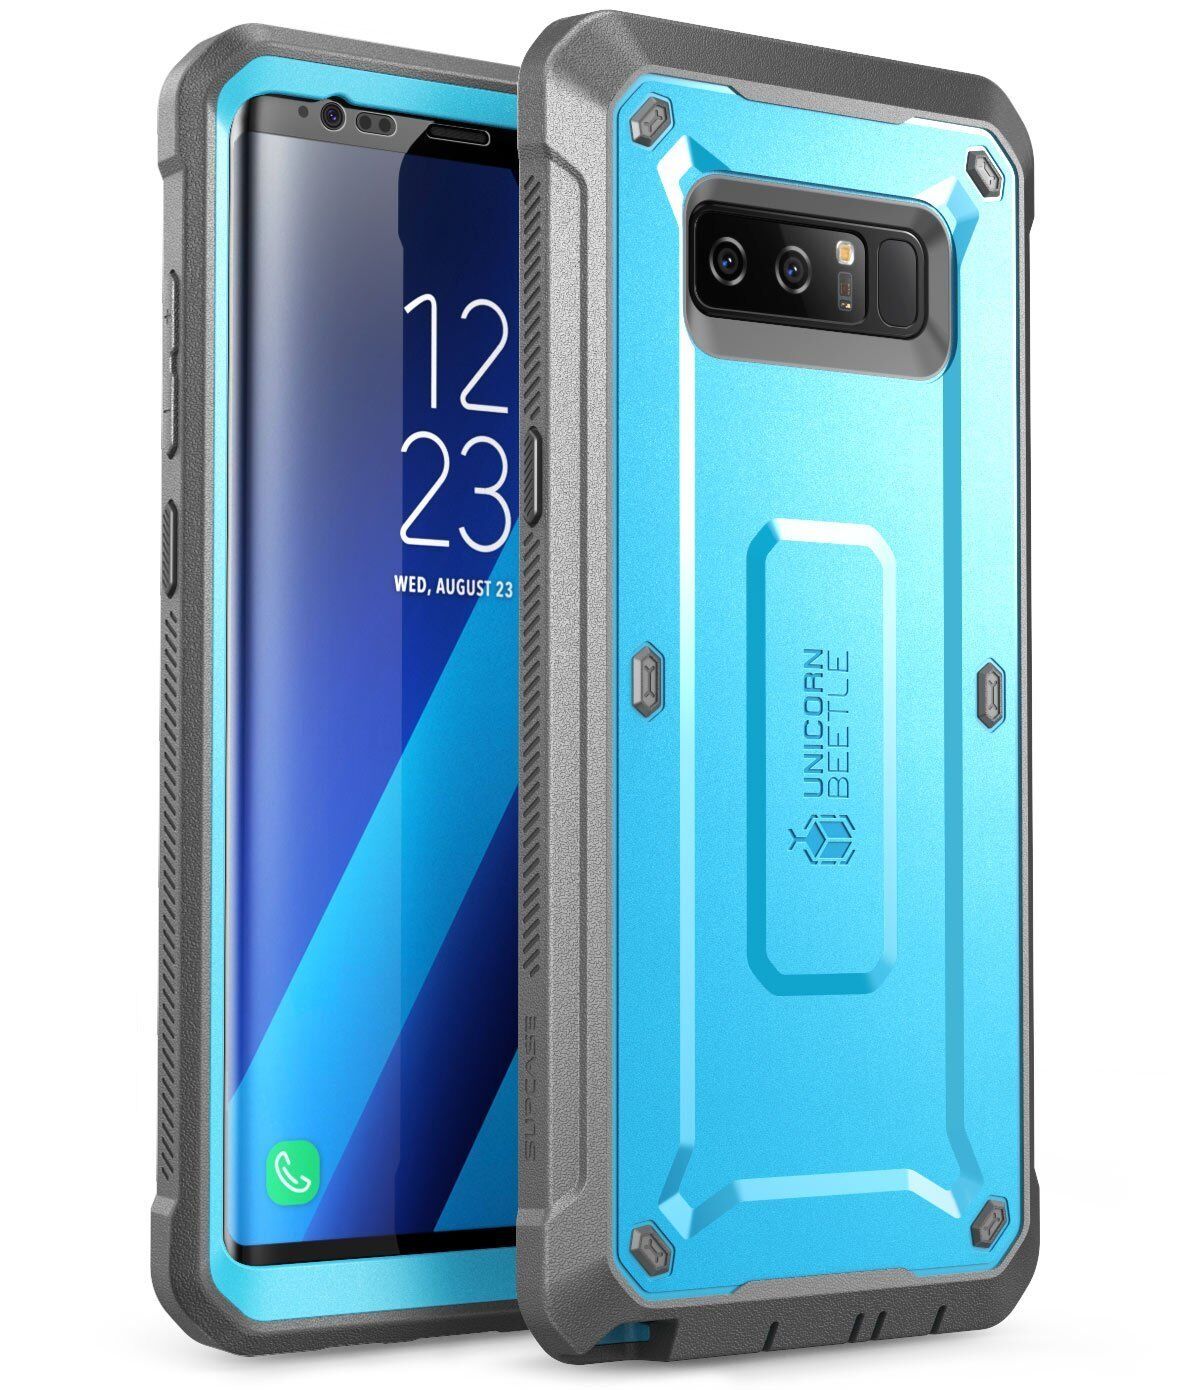  Galaxy Note 8 9 Note 10 10 Plus Case SUPCASE 360 Full-Body UB Pro Cover